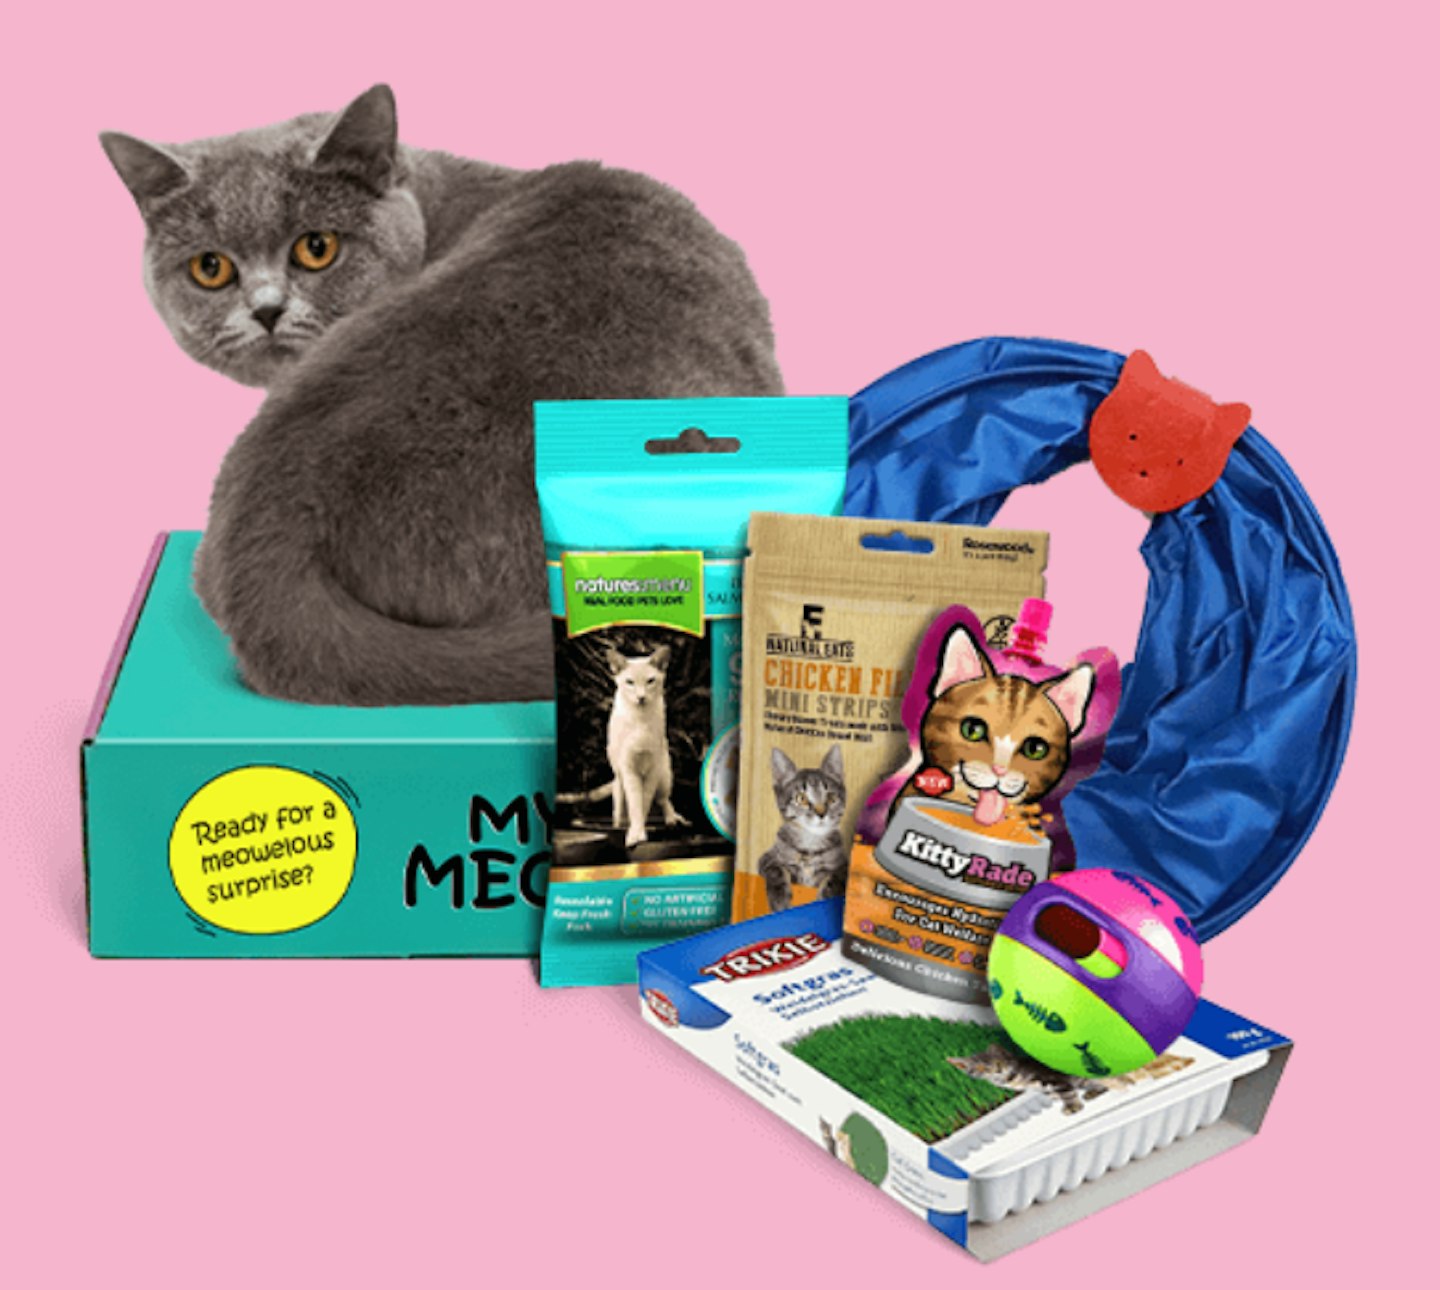 My meow cat subscription box